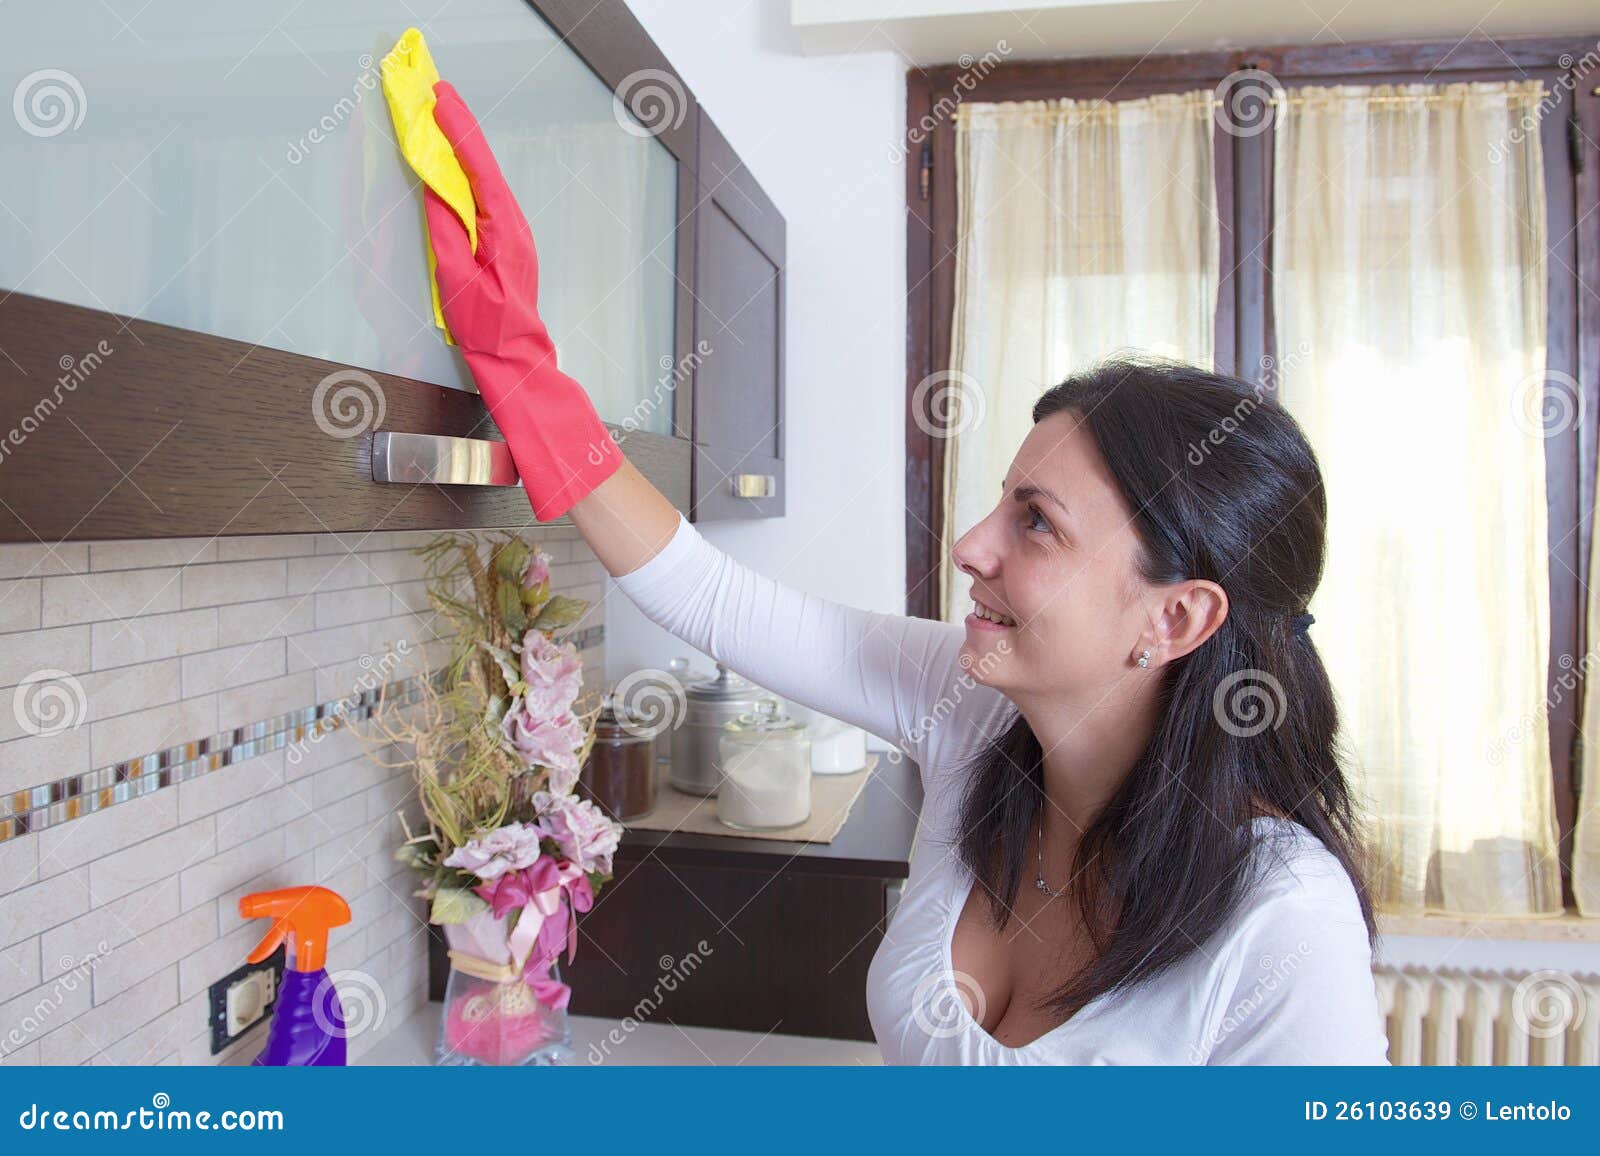 Housewife Cleaning Furniture In The Kitchen Stock Image Ima